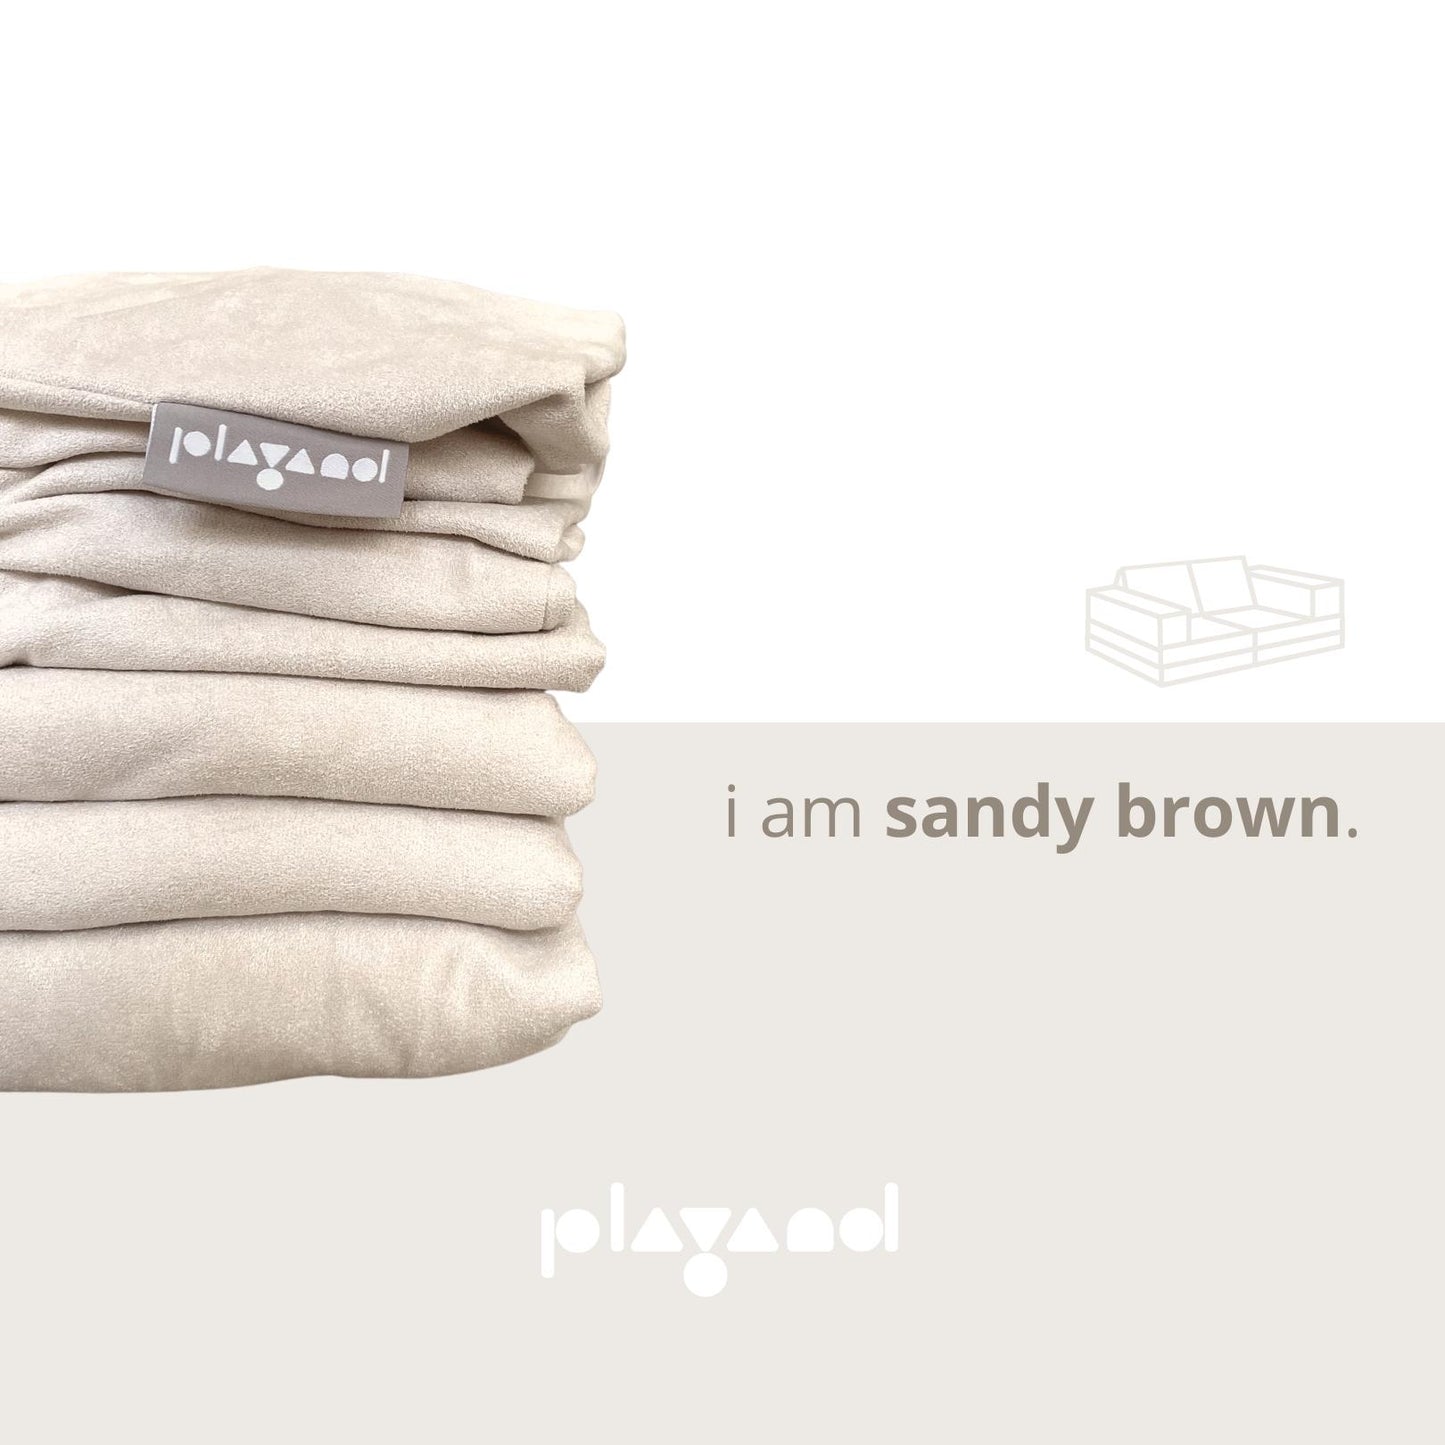 Playand Sofa Series Cover In Sandy Brown